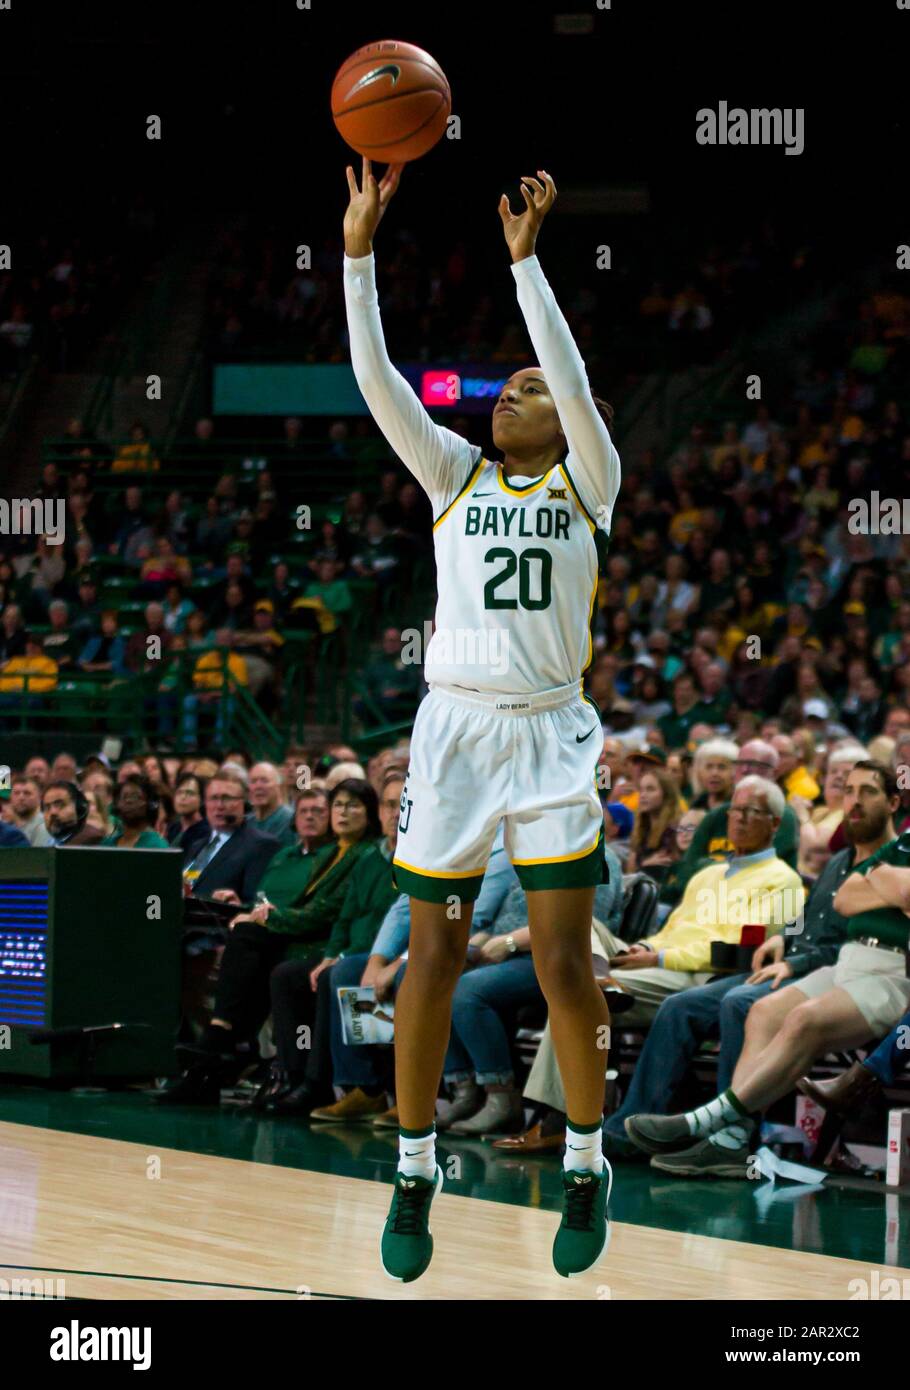 Waco, Texas, USA. 25th Jan, 2020. Baylor Lady Bears guard Juicy Landrum (20) shoots a 3 point shot during the 2nd half of the NCAA Women's Basketball game between Texas Tech Red Raiders and the Baylor Lady Bears at The Ferrell Center in Waco, Texas. Matthew Lynch/CSM/Alamy Live News Stock Photo